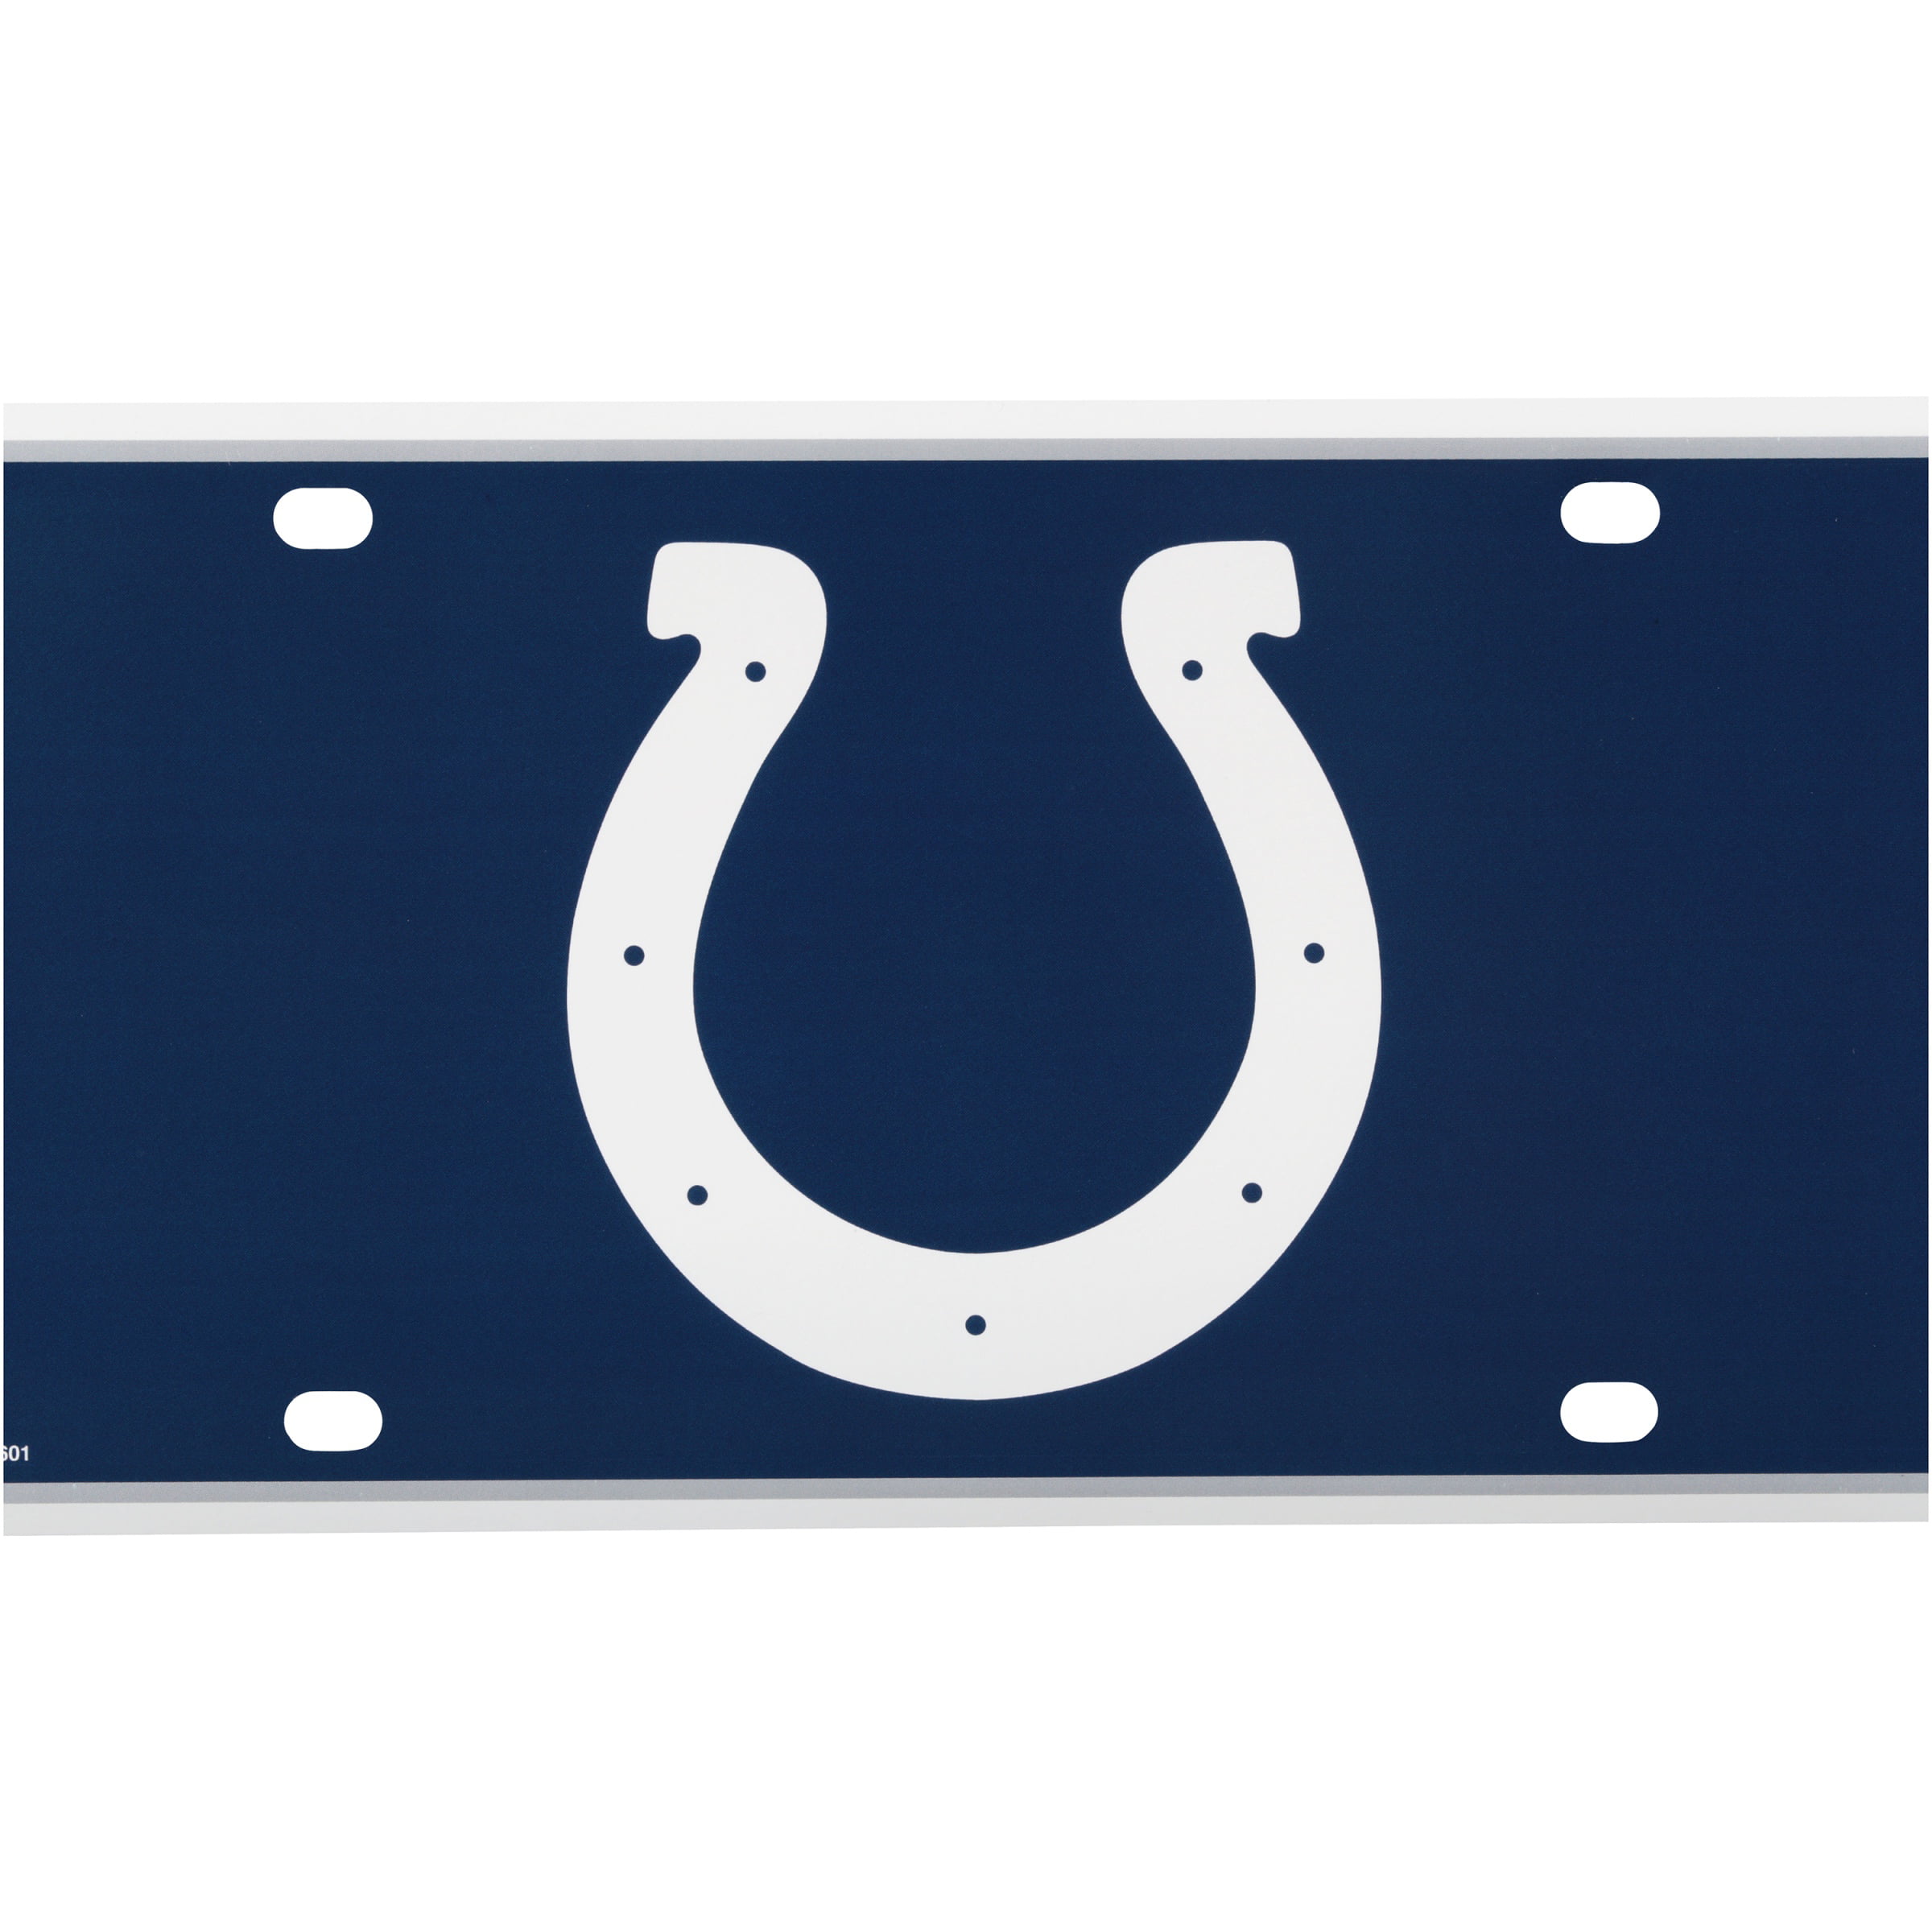 INDIANAPOLIS COLTS License Plate Frames Matte Black car football accessory 2 